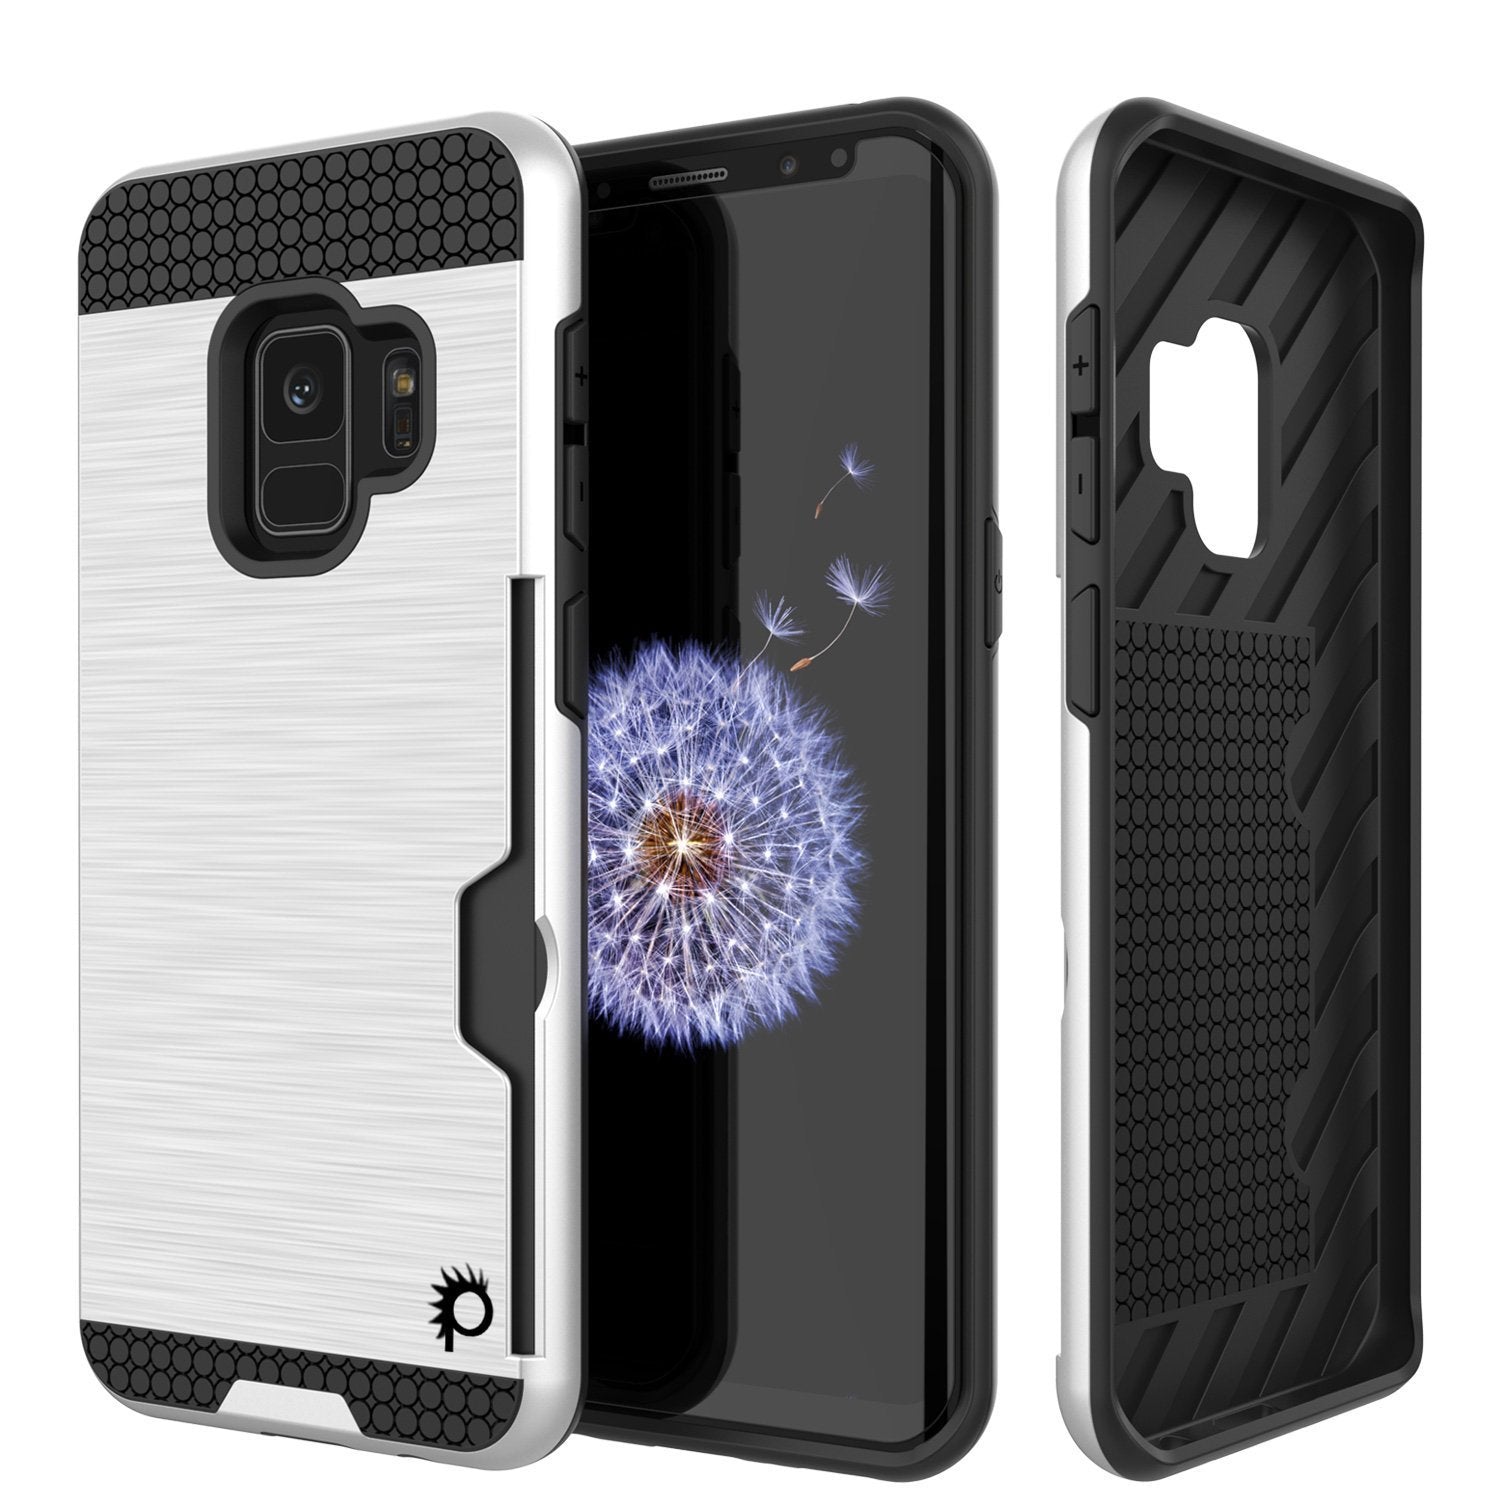 Galaxy S9 case, Punkcase SLOT Series Dual-Layer Cover [White]